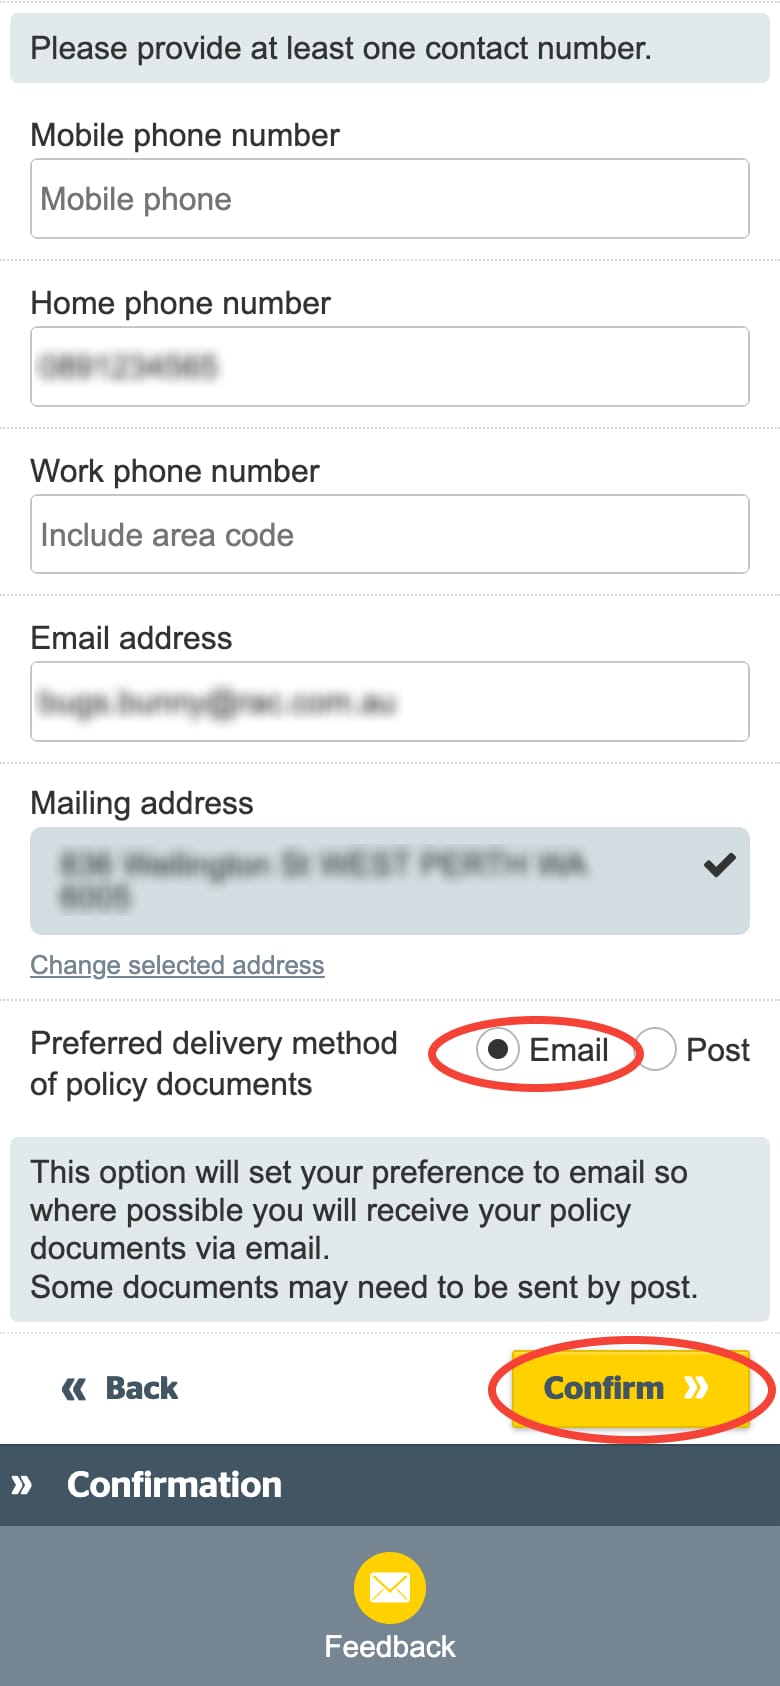 Selecting Email and Confirm on Mobile